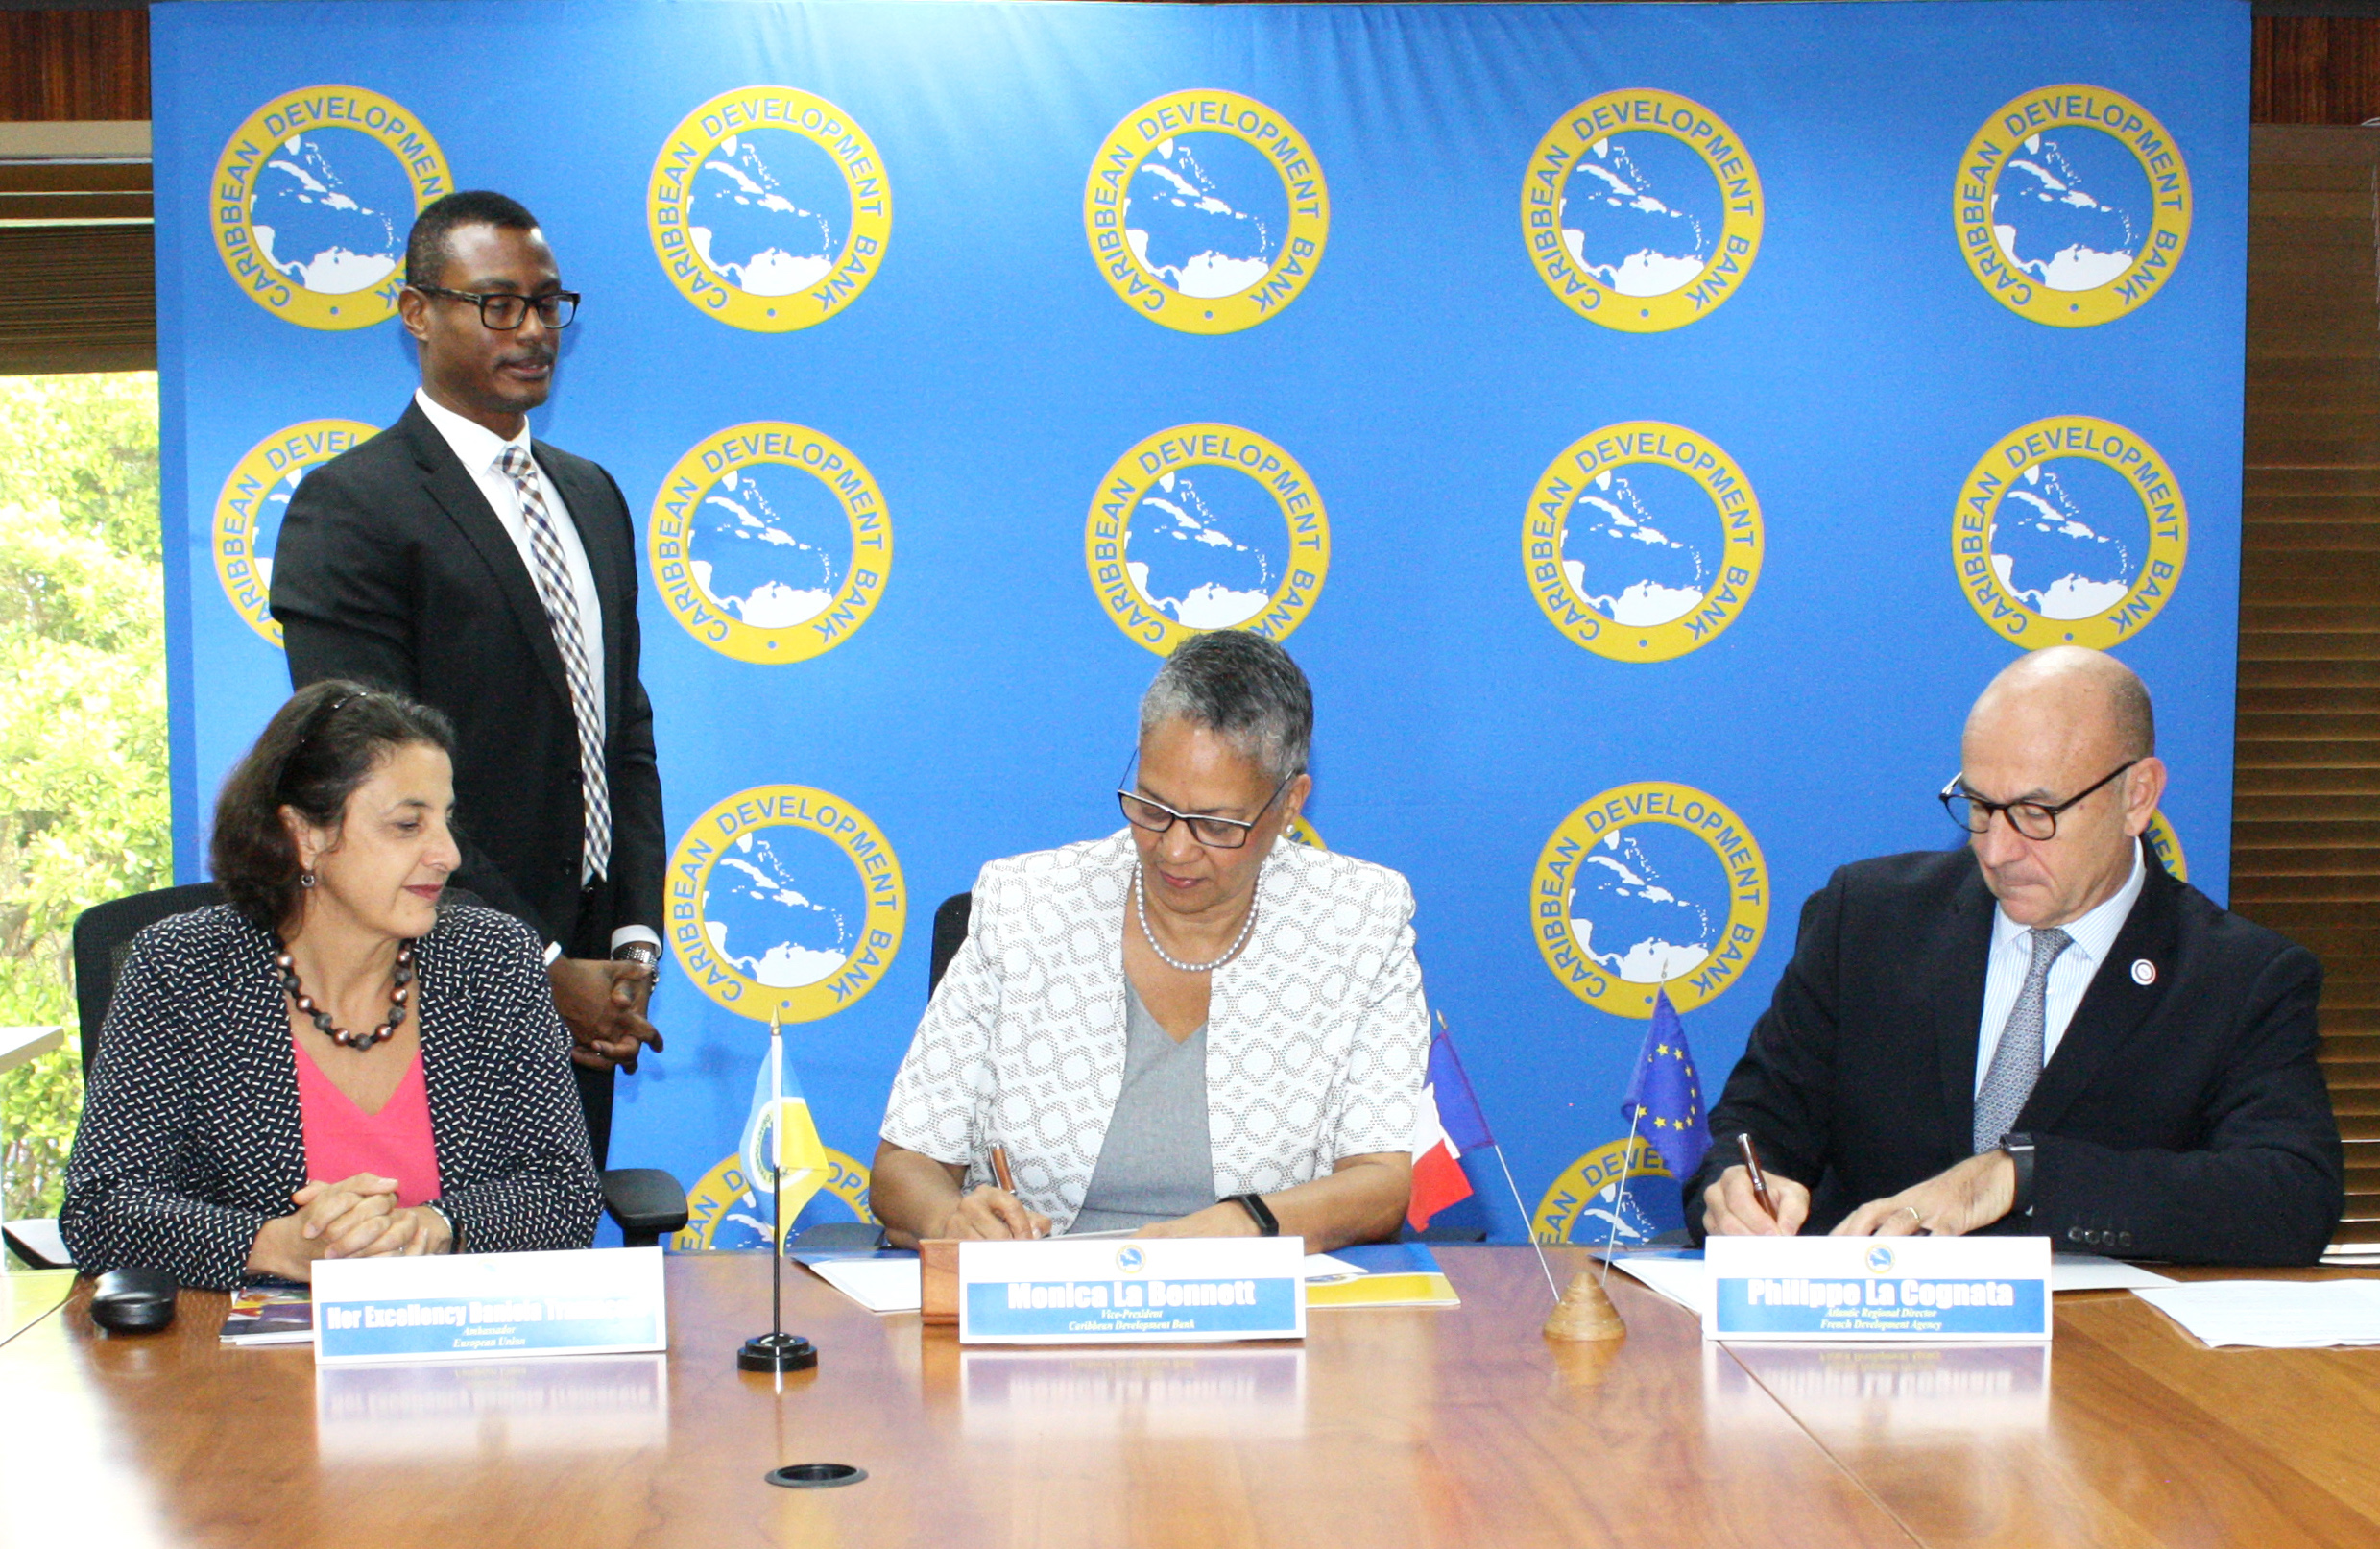 Vice-President (Operations) of the Caribbean Development Bank, Monica La Bennett (center) and Philippe La Cognata, Atlantic Regional Director, Agence Française De Développement (right) sign the finance agreement. At left, Ambassador Daniela Tramacere, Head of the European Union Delegation to Barbados, the Eastern Caribbean, OECS and CARICOM/CARIFORUM and CDB Senior Legal Counsel Dave Waithe (second from left) look on.